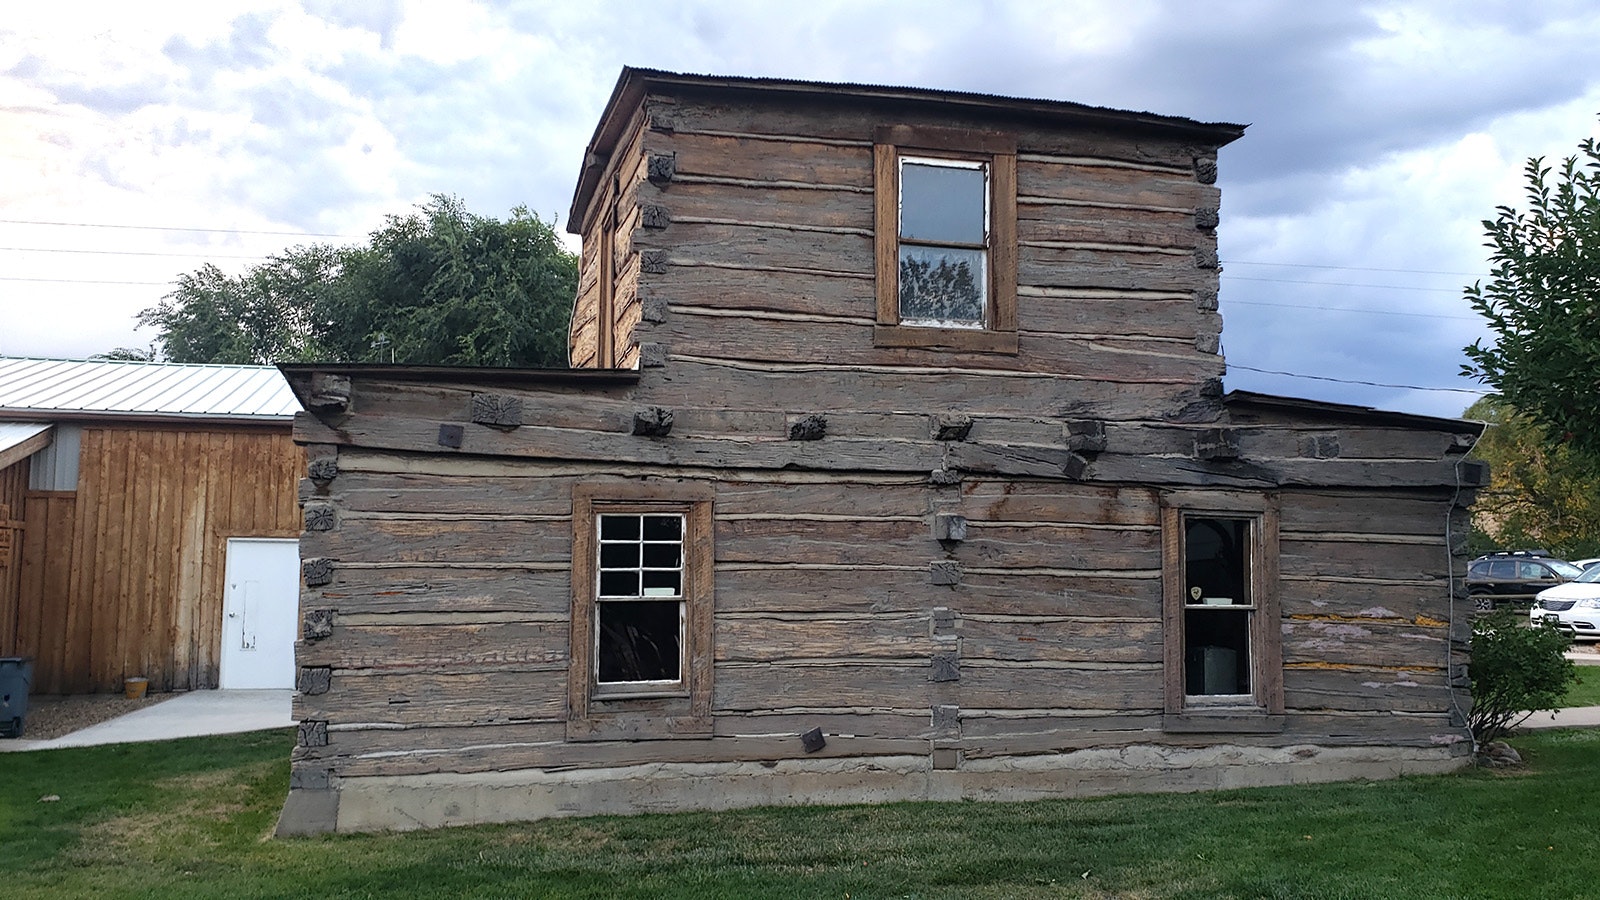 Jim Baker's castle cabin on the plains has been rebuilt a mile or so from its original location at the Little Snake River Museum in Savery. It had a turret for its third story to serve as a watch tower.